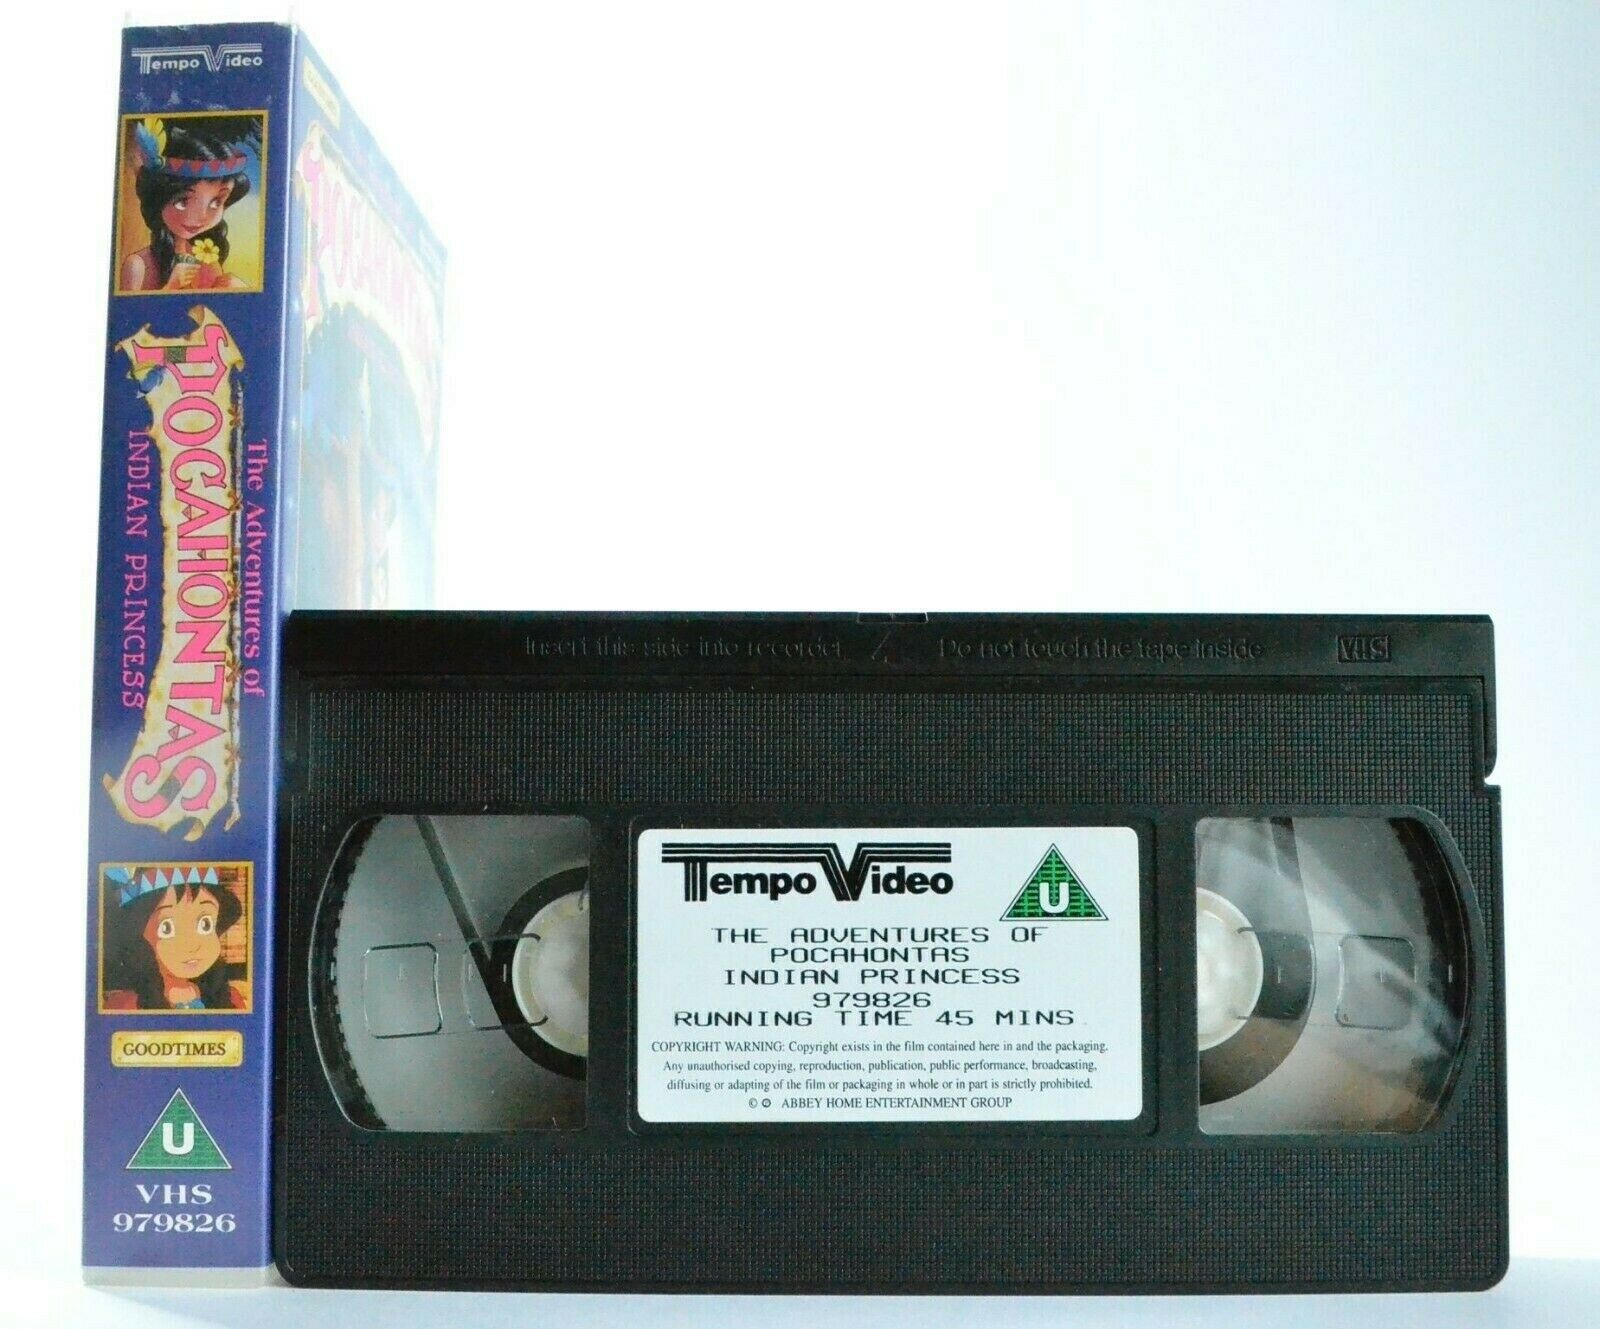 The Adventures Of Pocahontas Indian Princess (Tempo Video) - Children's - VHS-